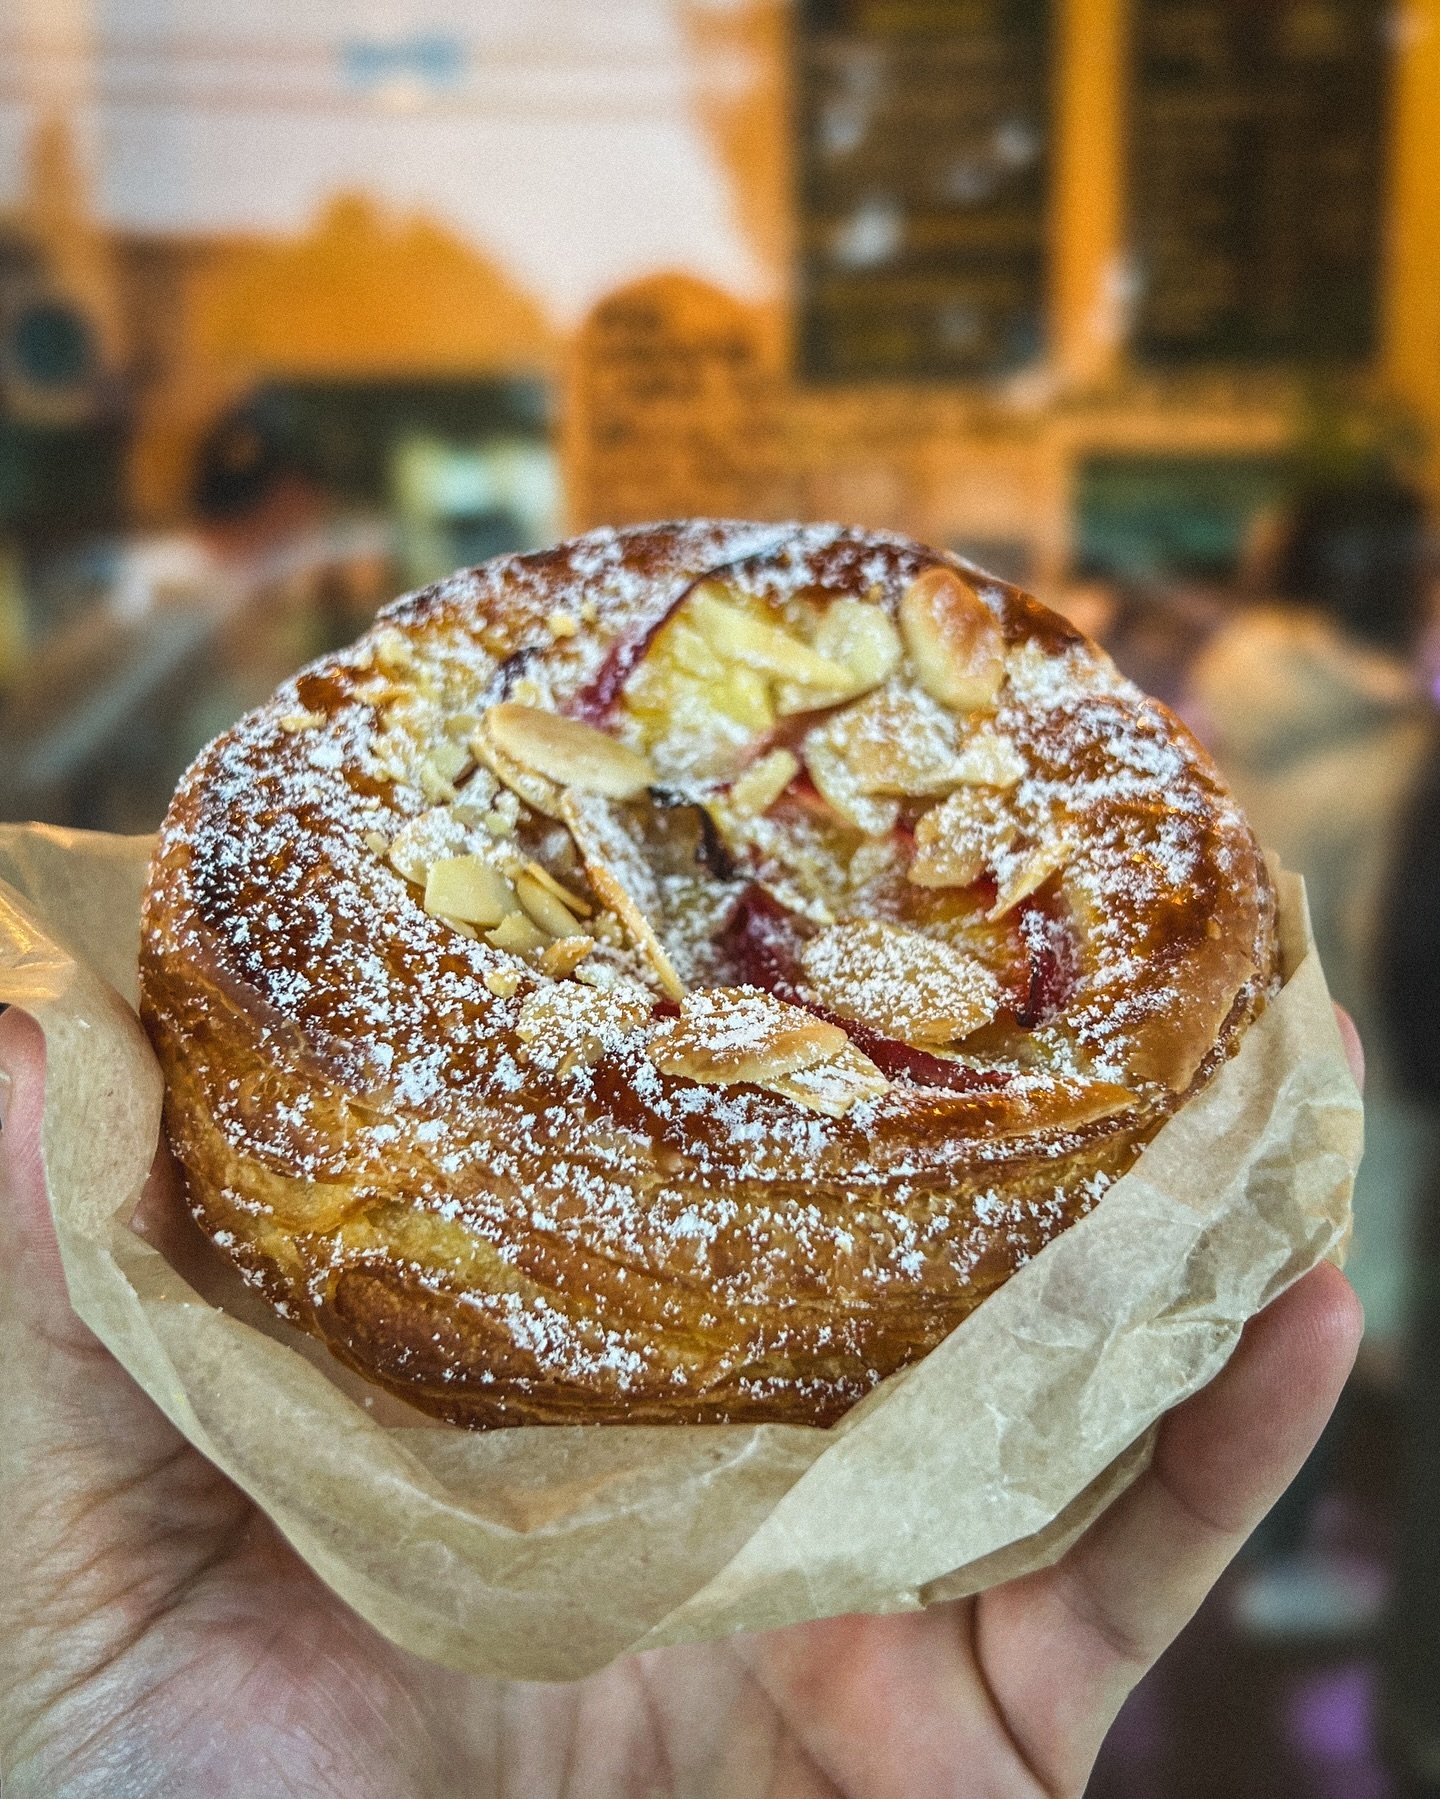 Our New Croissant Rounds are Heavenly ~ Filled with Almond and Nectarine, Topped with a Dash of Powdered Sugar and Slivered Almonds. They are a Treat Worth of YOU! ❤️&zwj;🔥🎉❤️&zwj;🔥